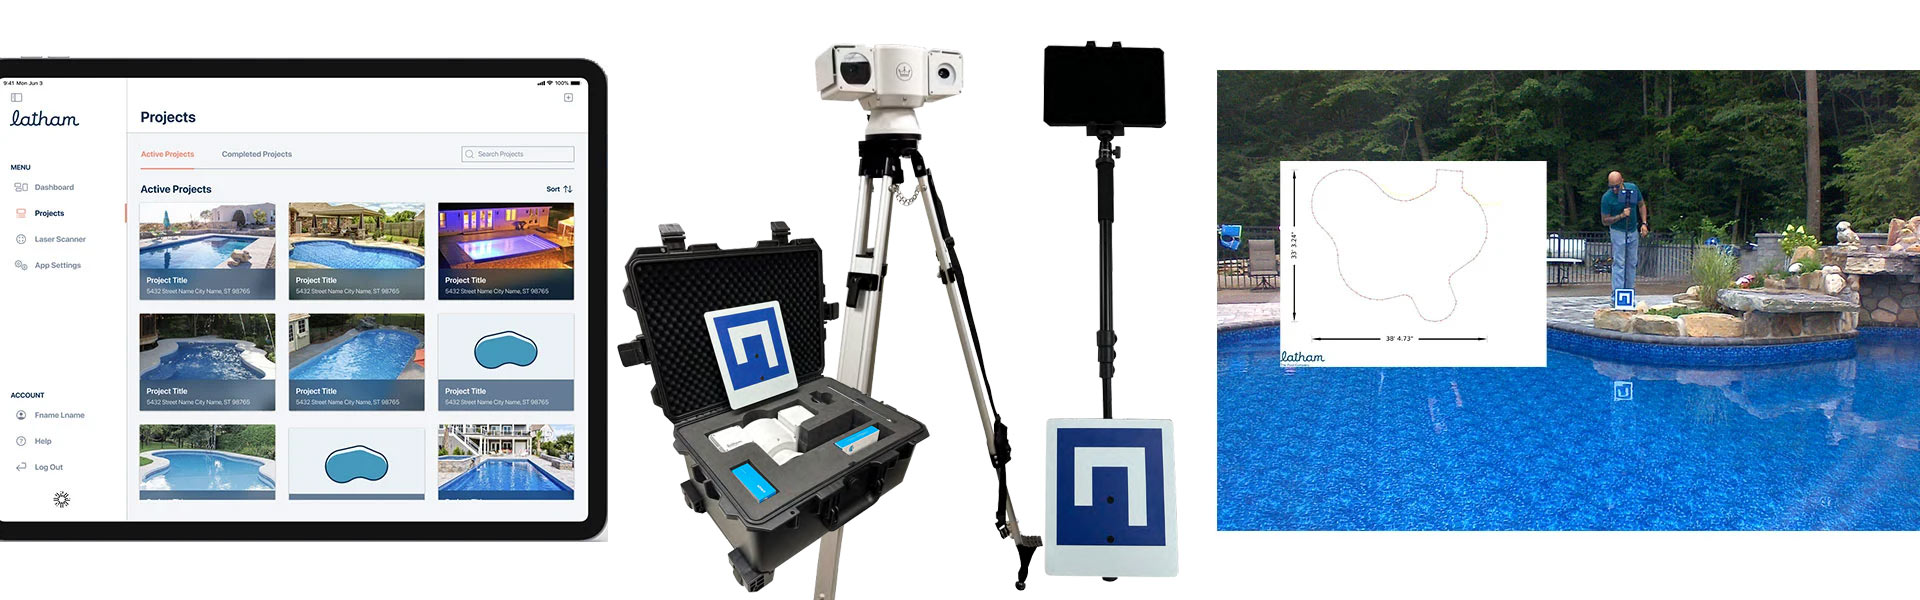 M1 devices for scanning pool with dashboards for latham pools